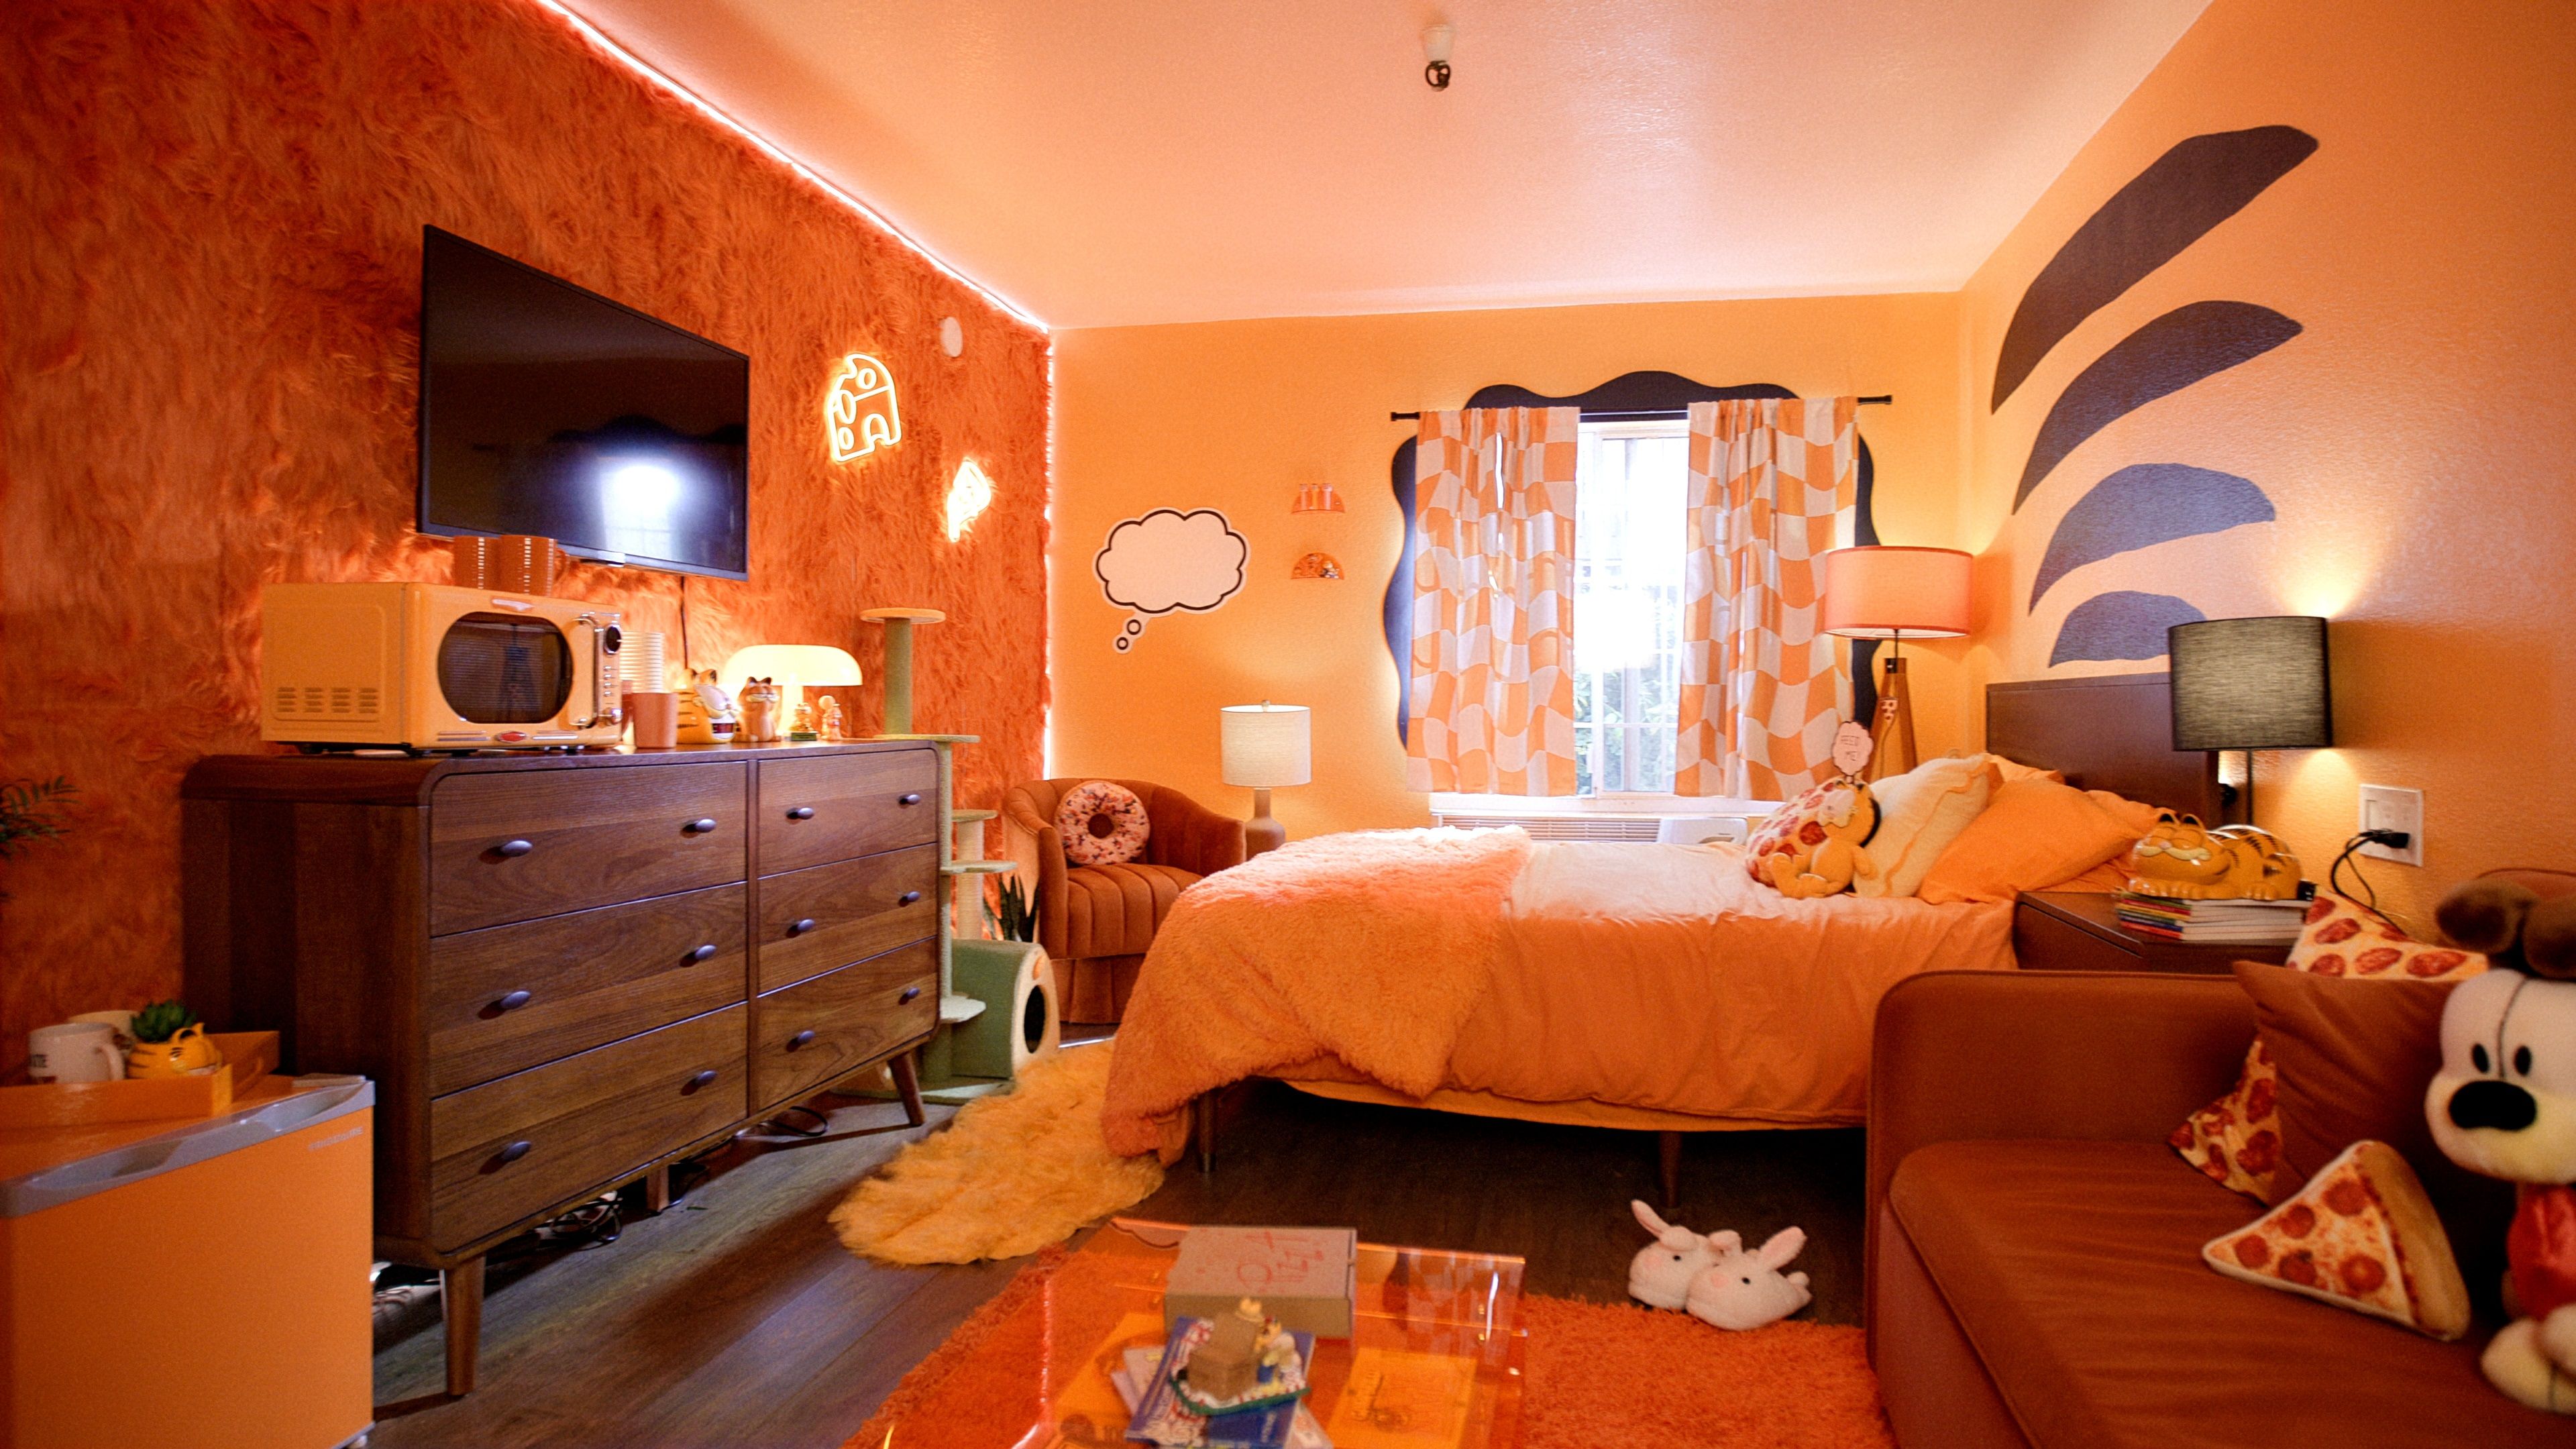 The Garfield Movie Unveils Themed Rooms for Motel 6